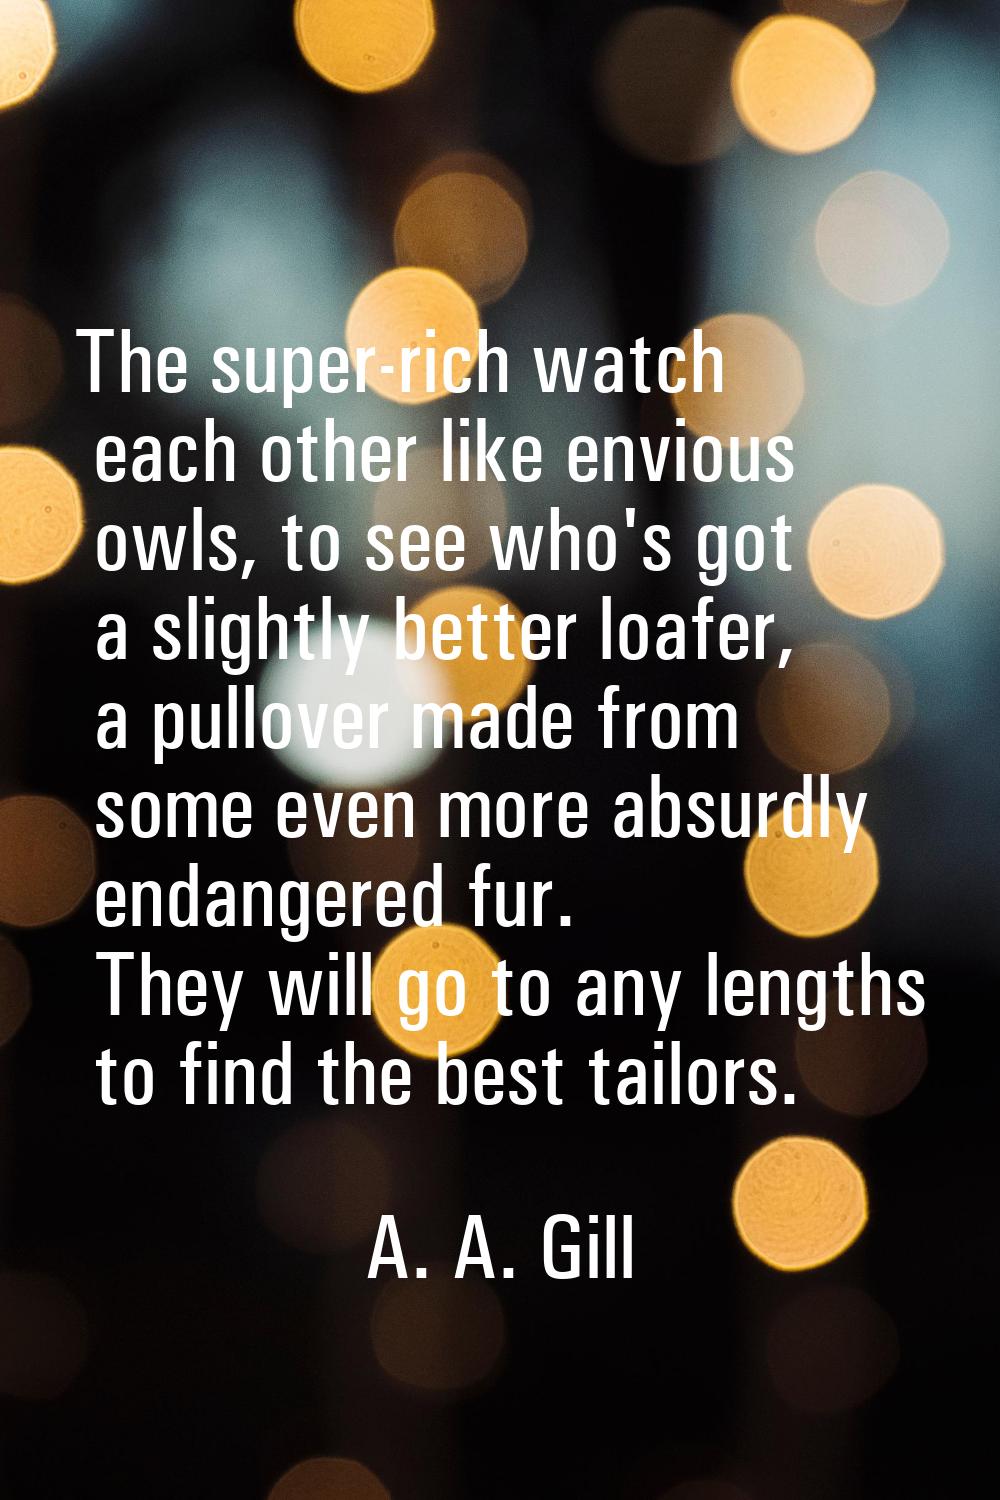 The super-rich watch each other like envious owls, to see who's got a slightly better loafer, a pul